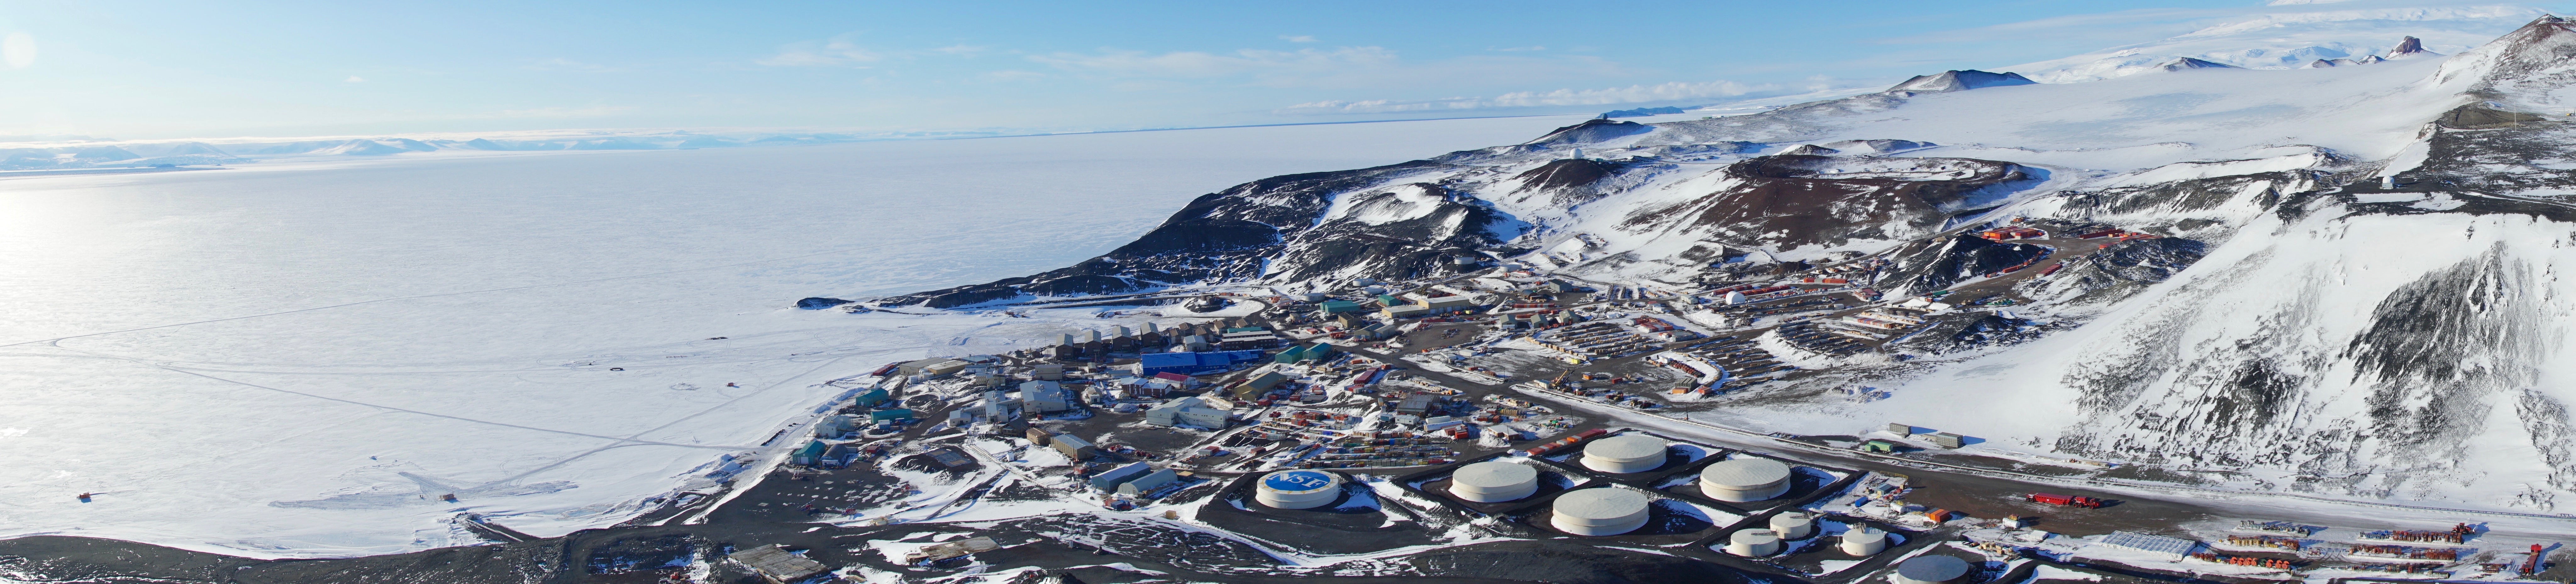 McMurdo Station, seen here, is a U.S. research station located in Antarctica. (Photo: Kerry Key)